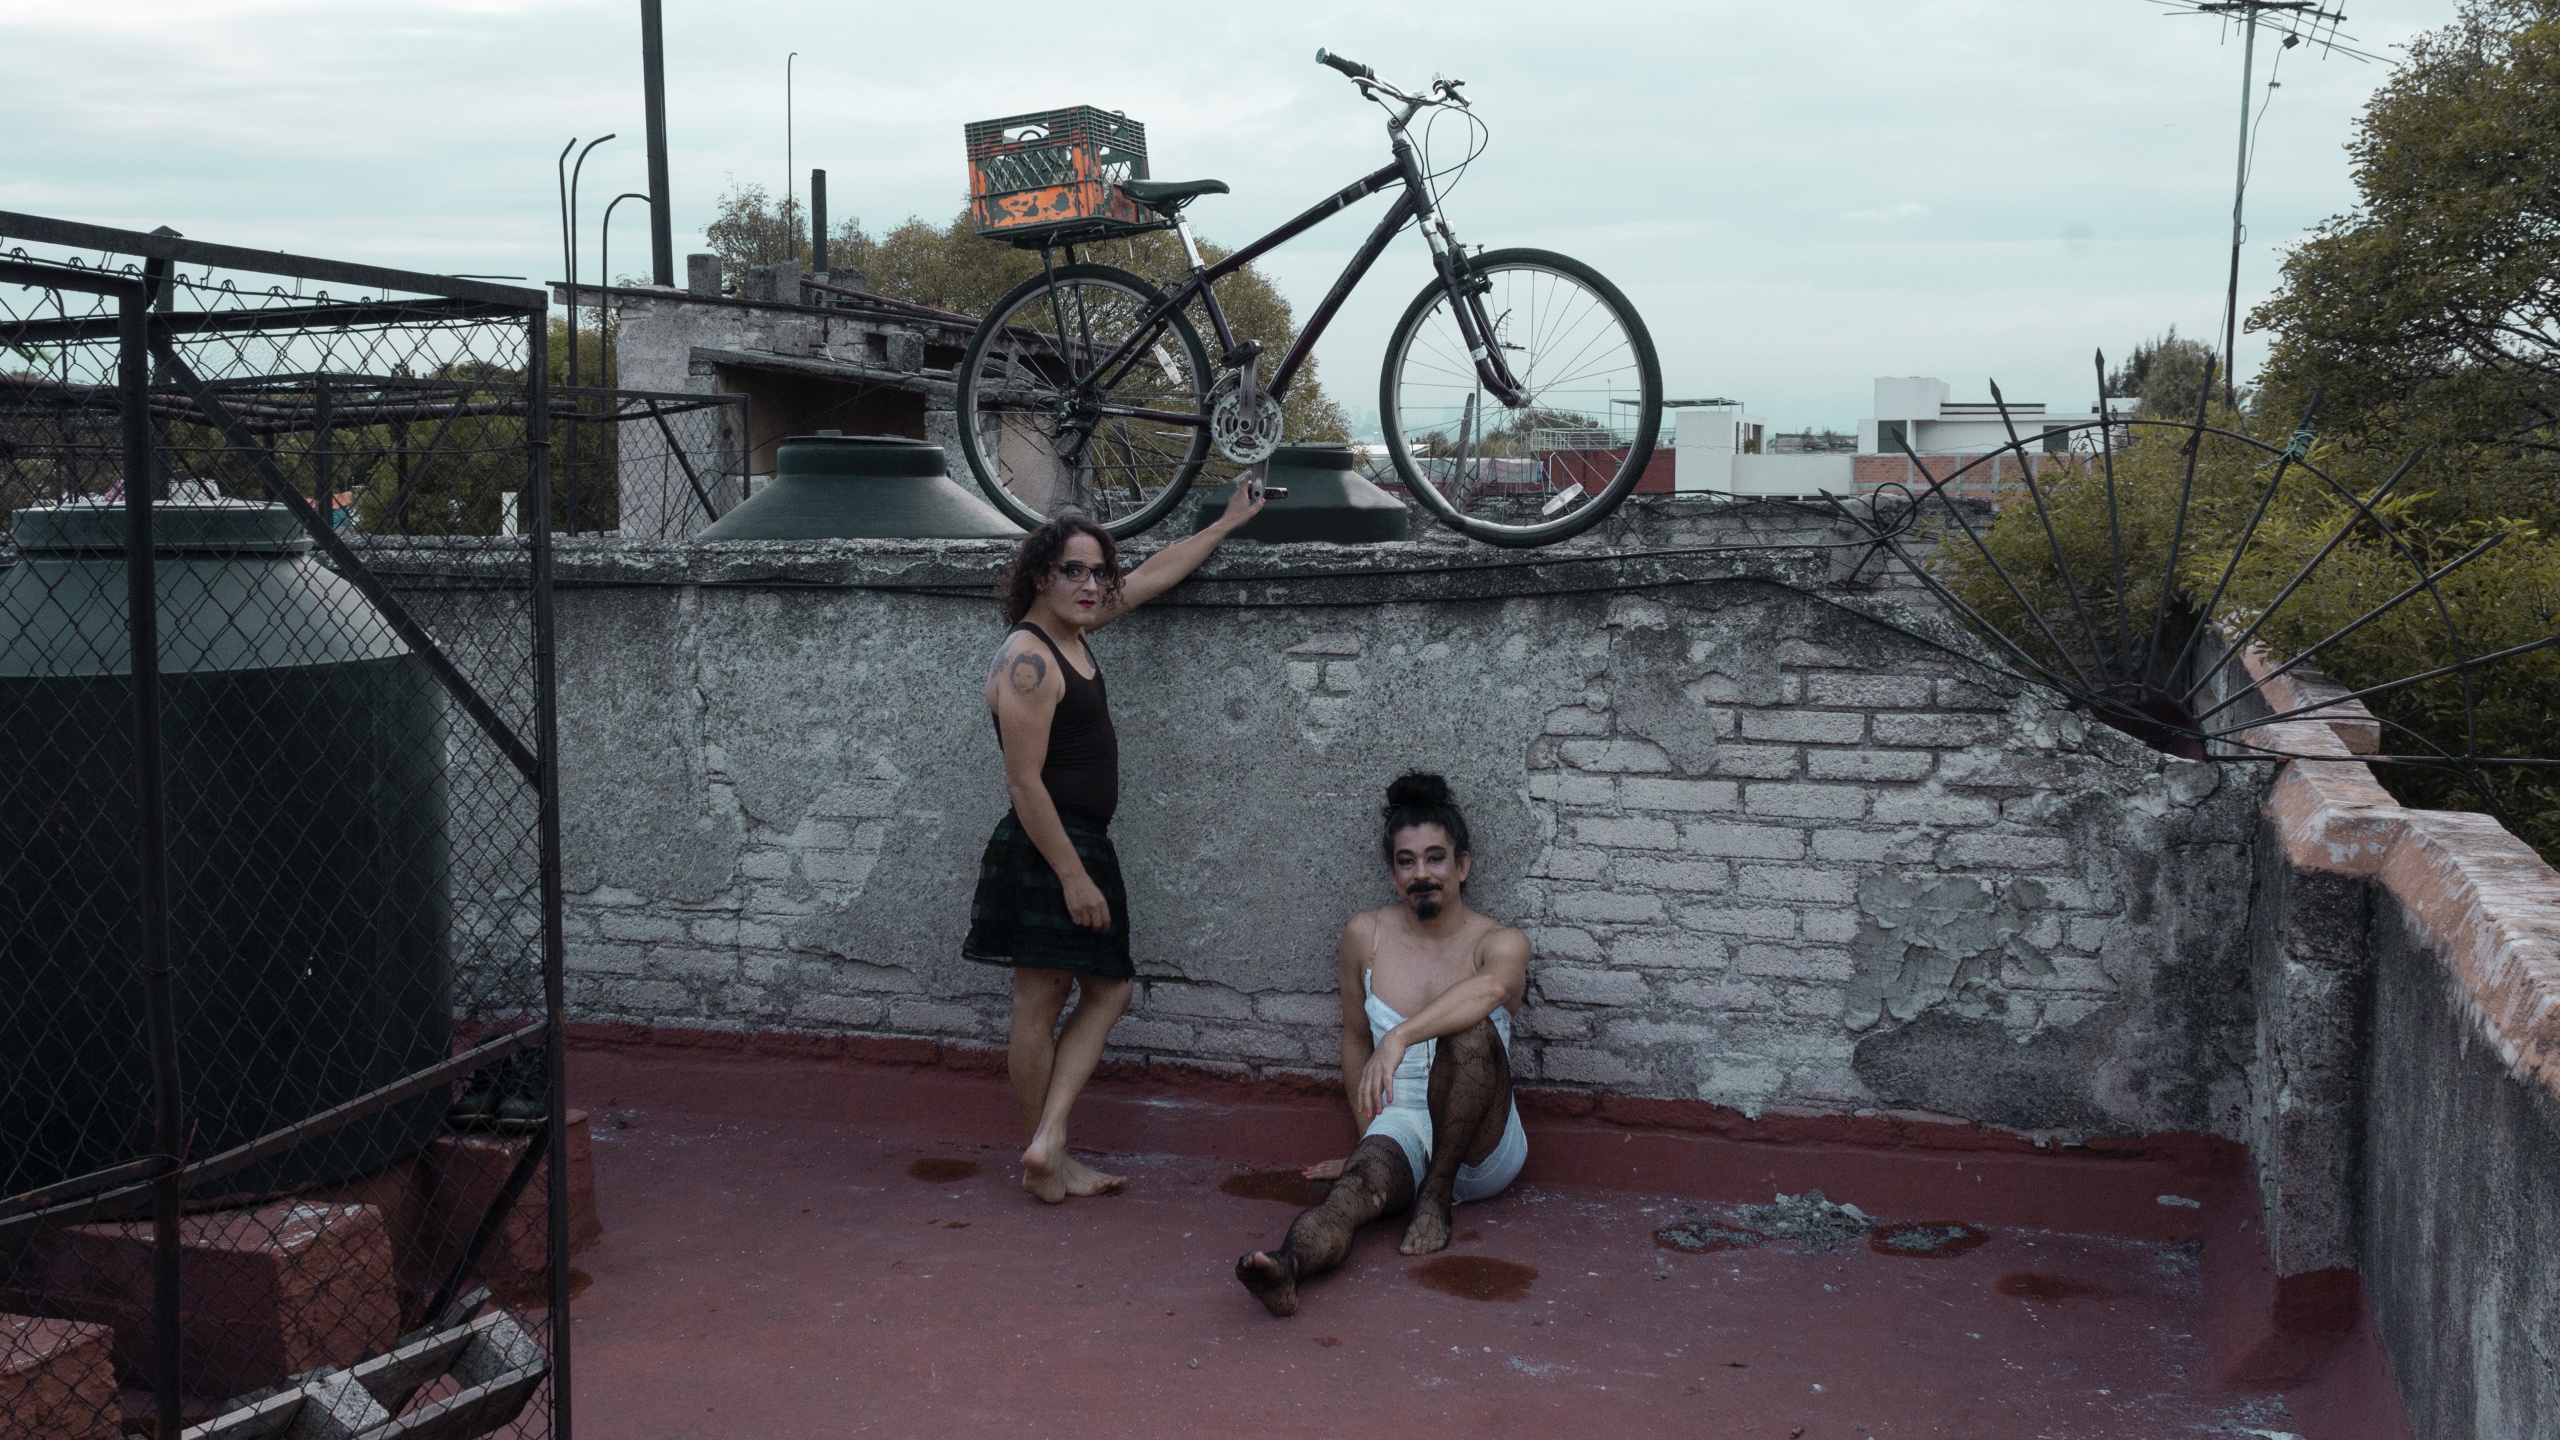 A gender-nonconforming person, standing, and a nonbinary person (the artist), sitting with one leg outstretched, are on a rooftop in Mexico City. A bike held up by the gender-nonconforming person balances on the wall of the rooftop.